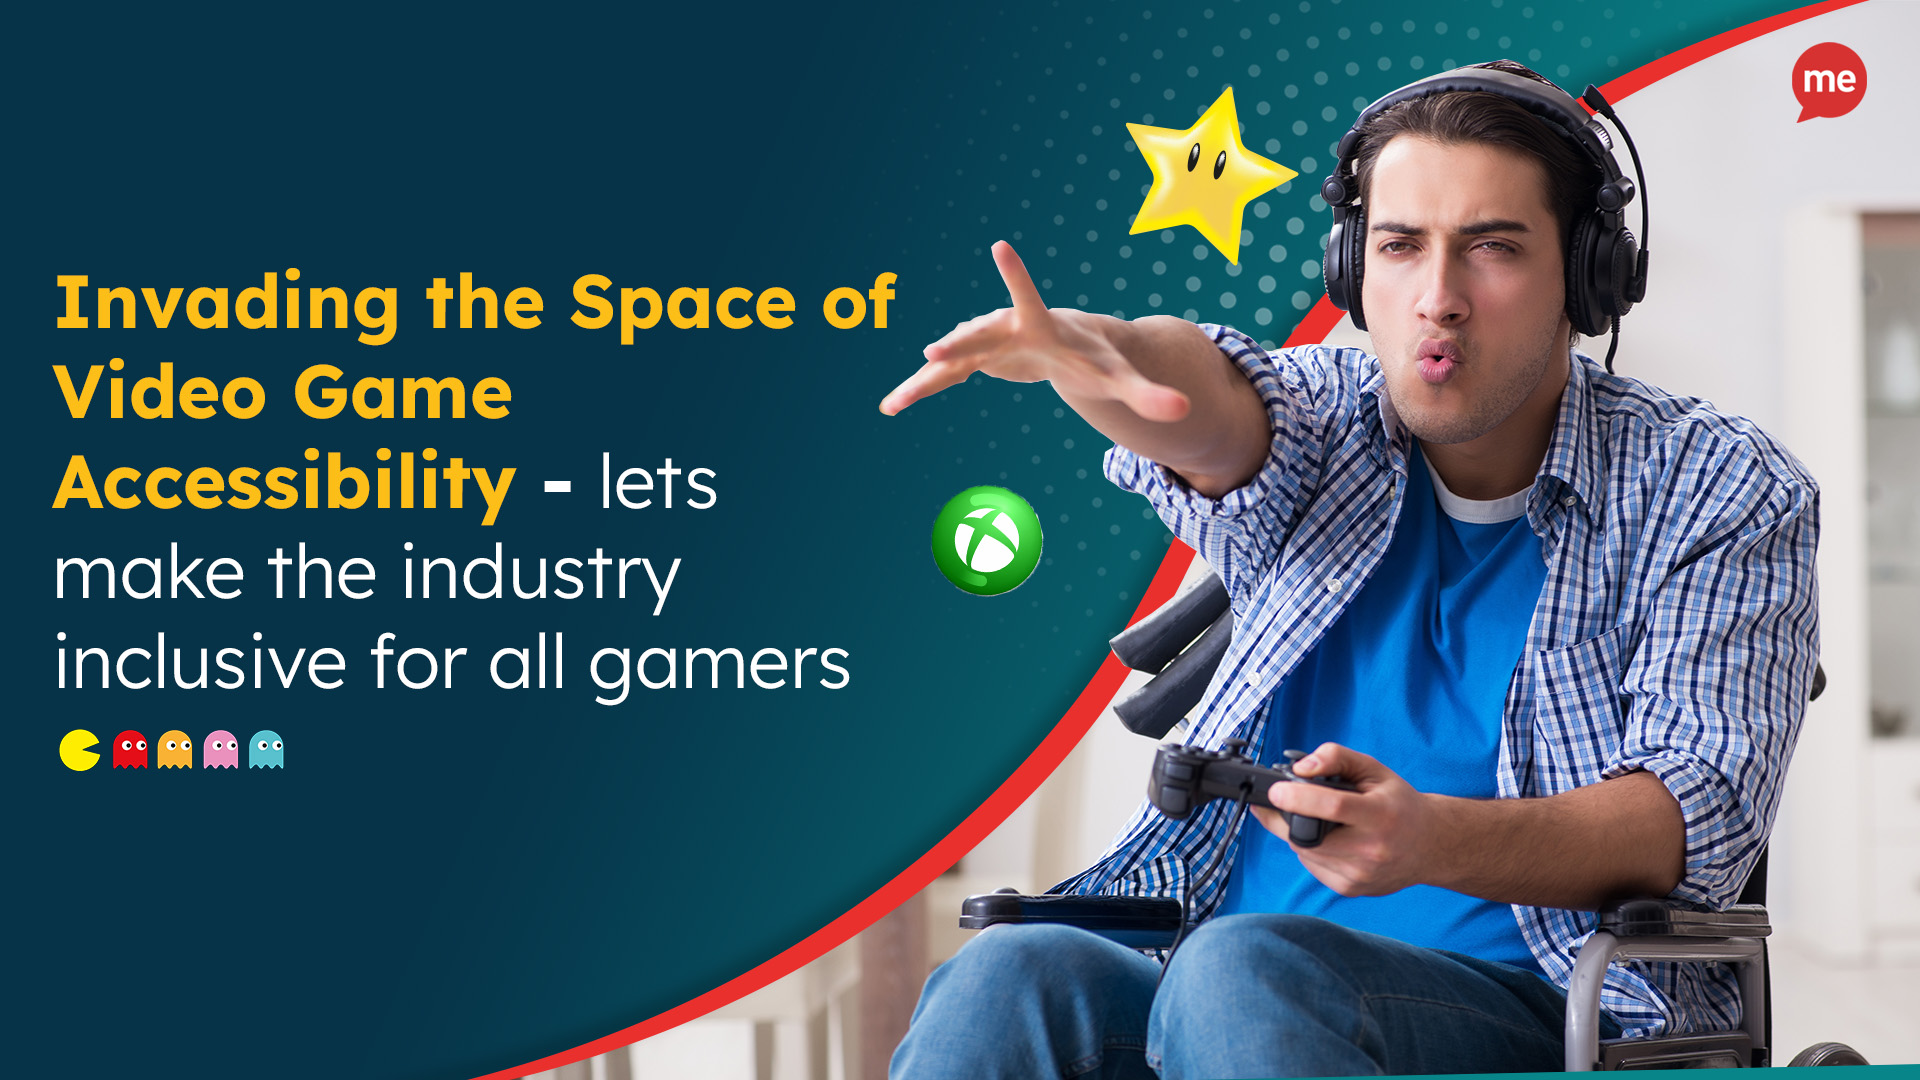 A man in a wheel chair reaches out towards the screen with a playstation 4 controller in his left hand. There is a mario star & the xbox logo floating along side him. The text reads "Invading the Space of Video Game Accessibility - It's time to make the industry inclusive for all gamers"